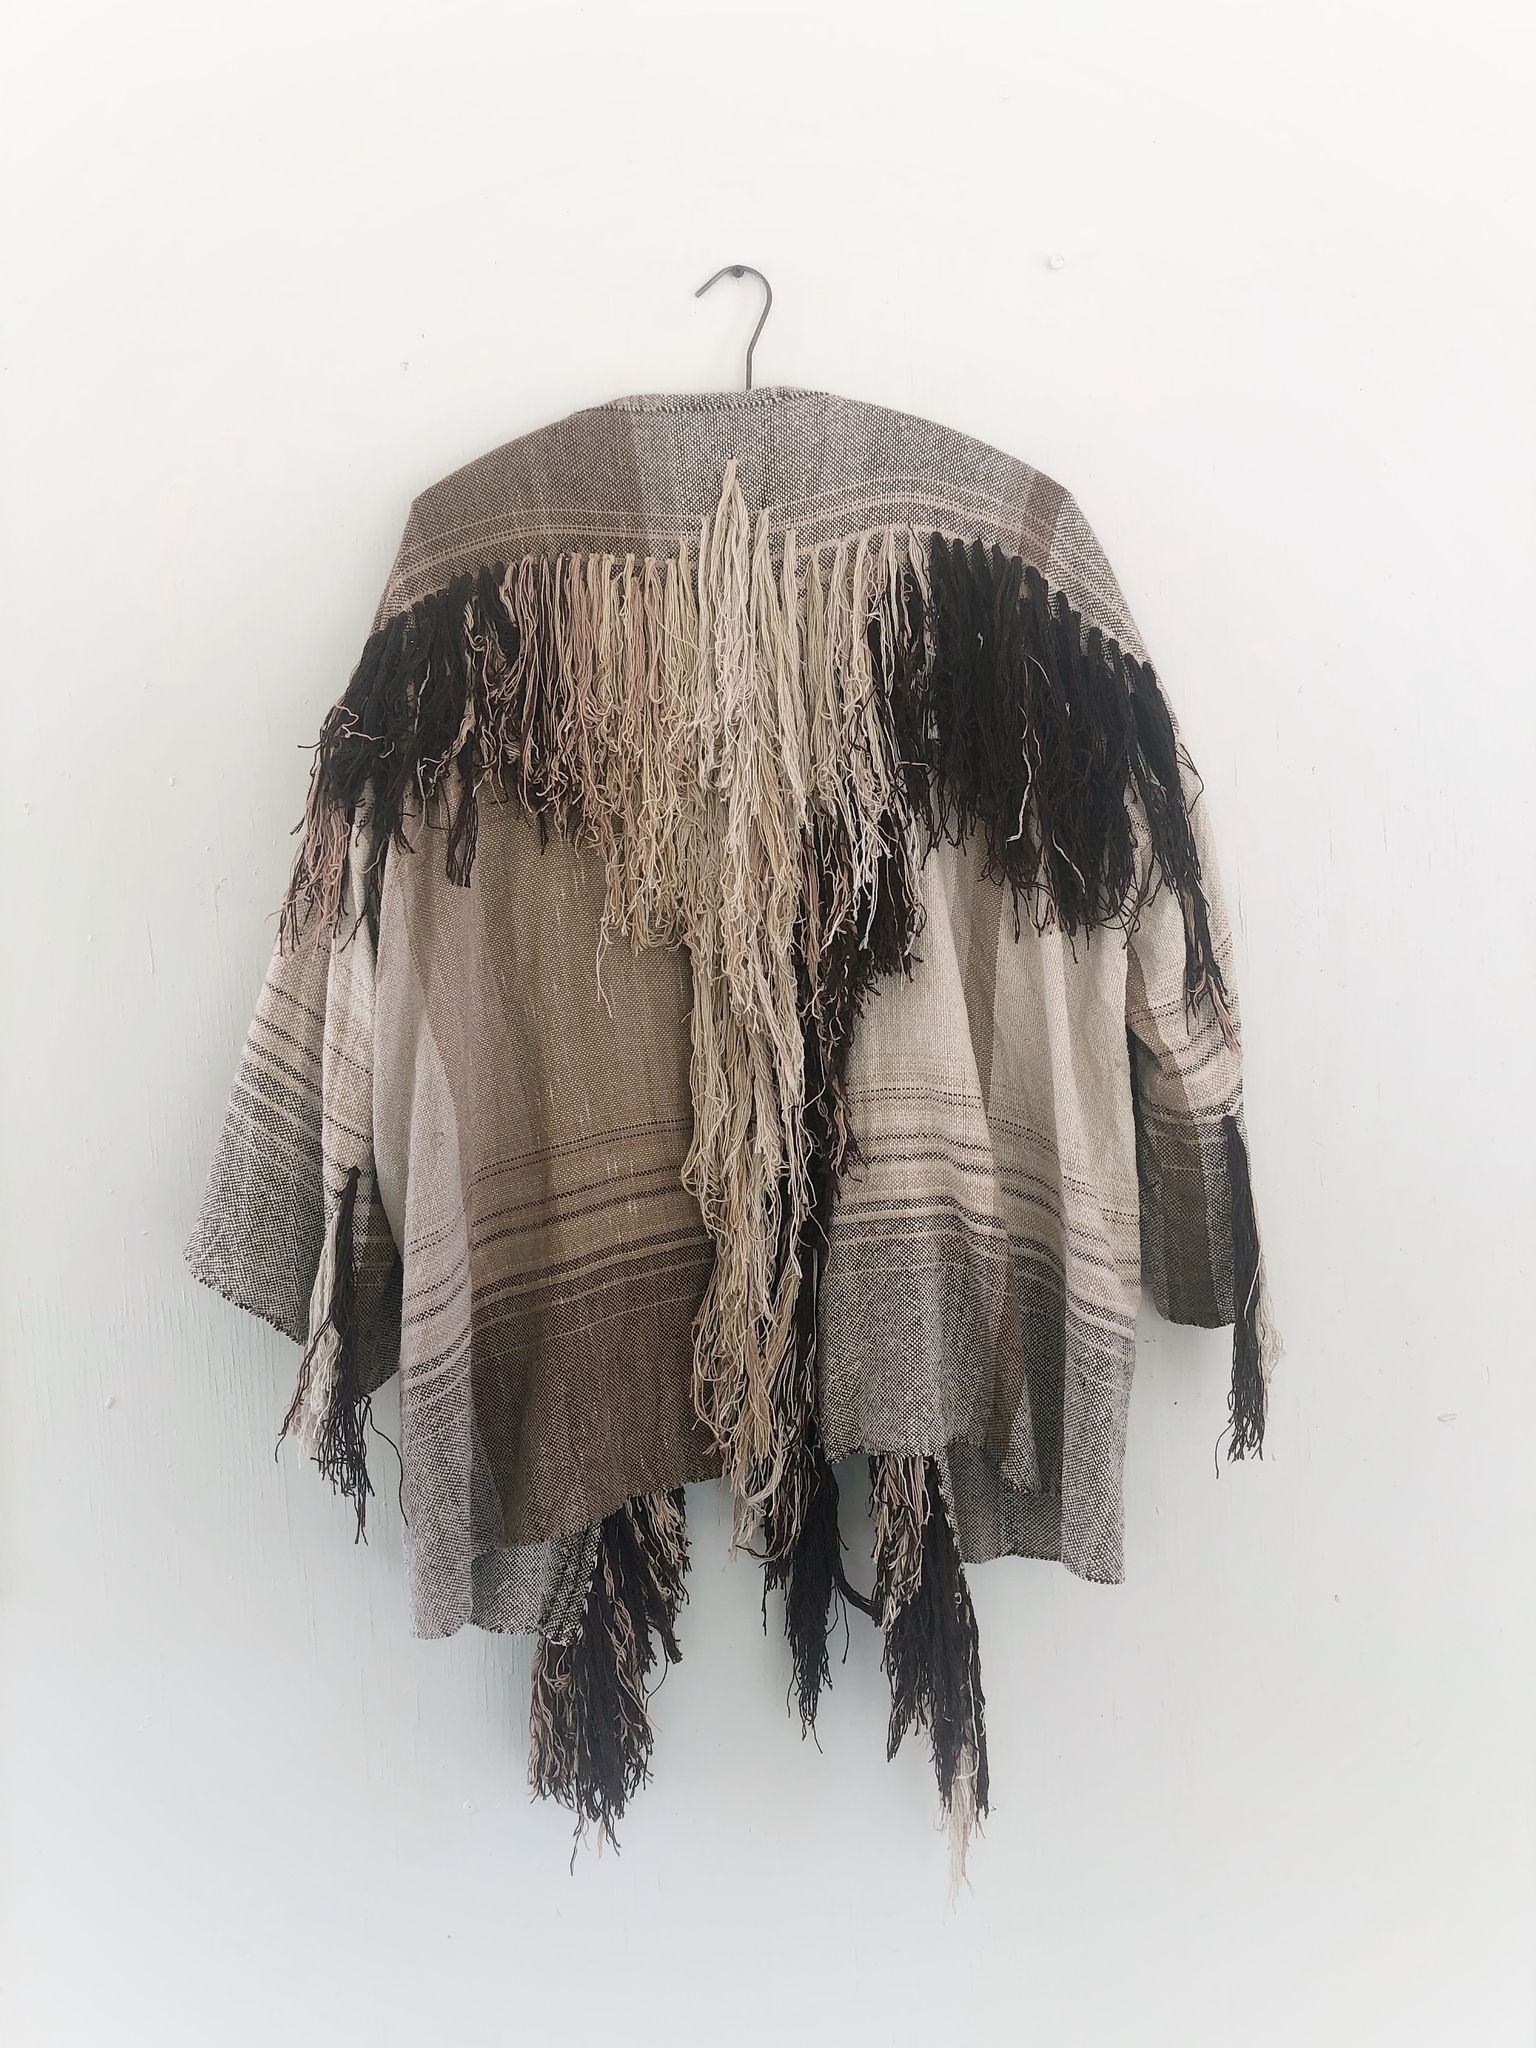 raw silk and organic cotton linen brown, tan and white Handwoven fringed Cloak hanging on a hanger on a white wall